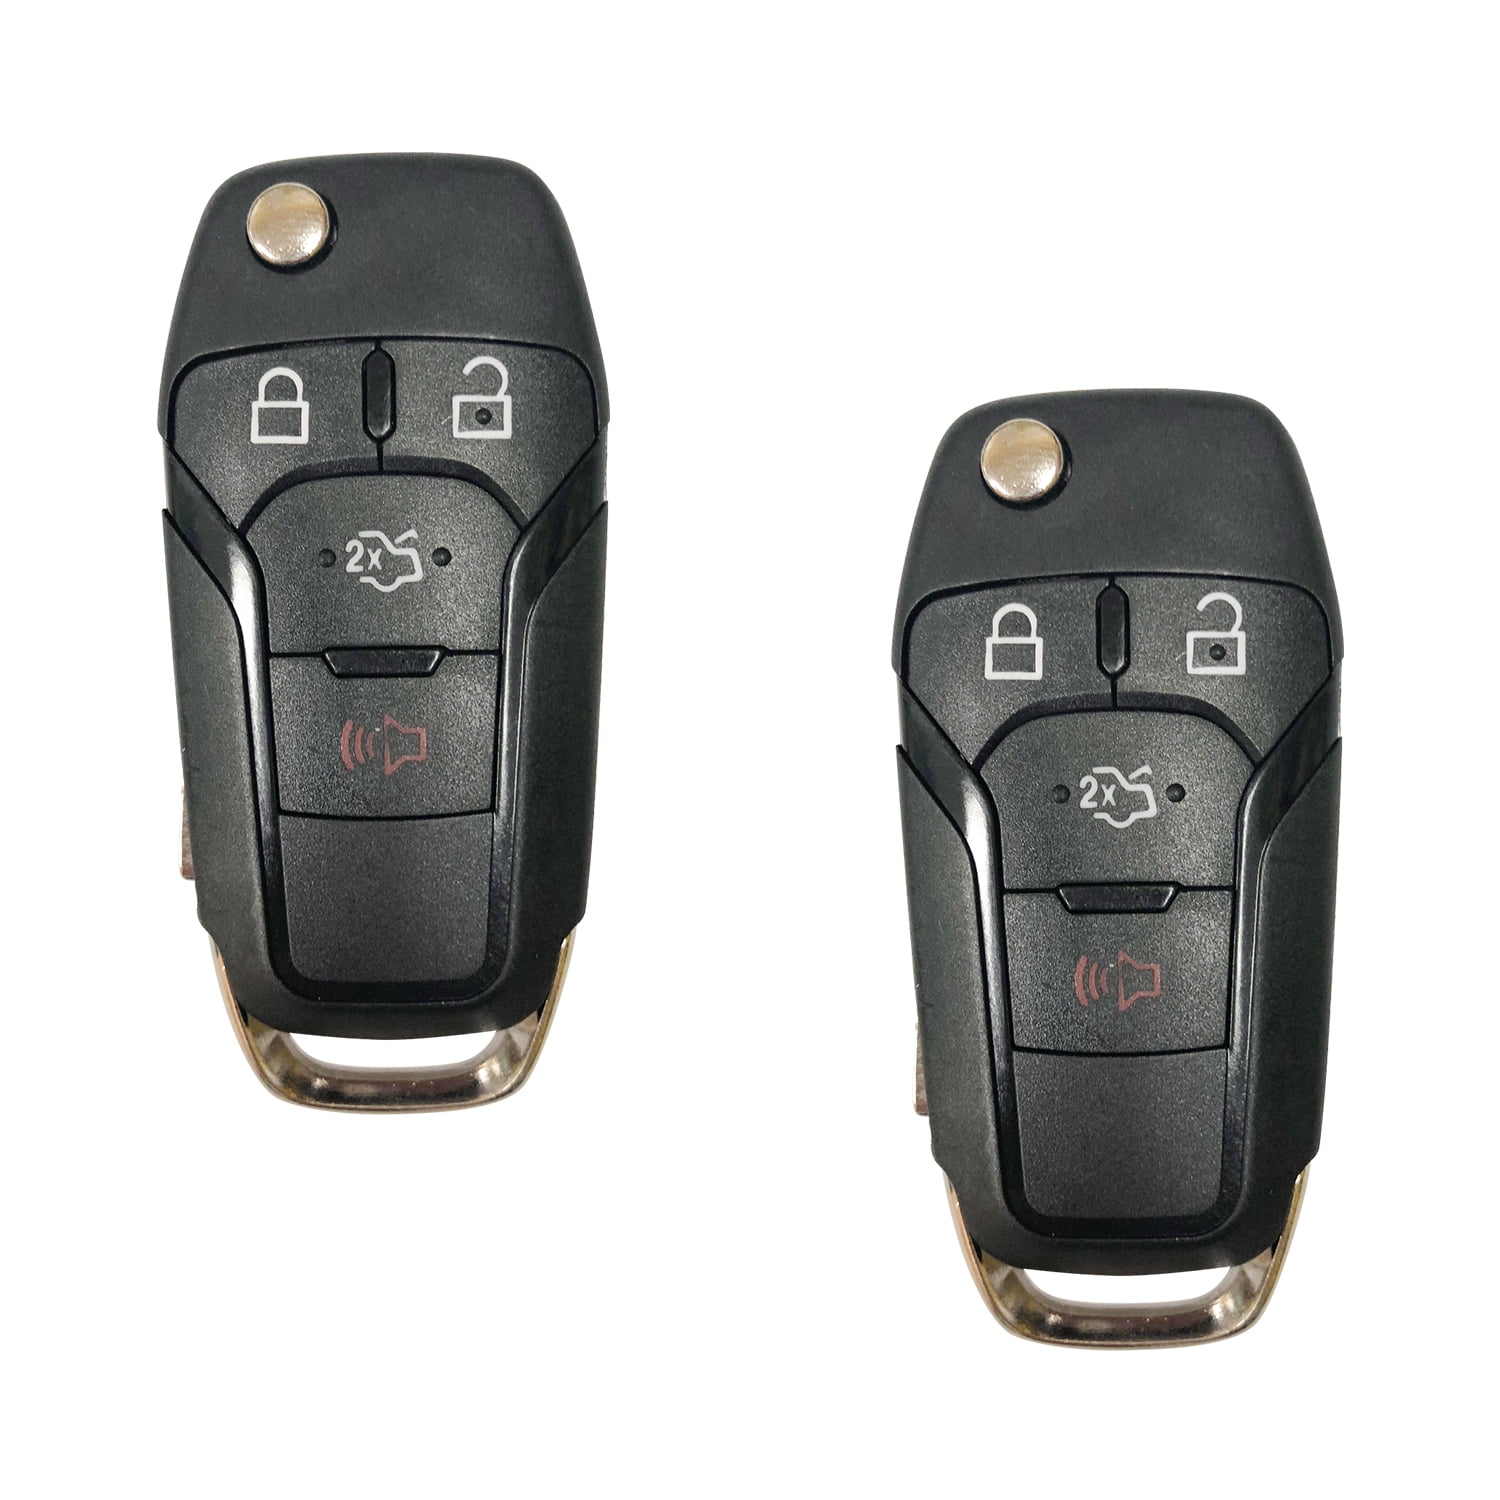 NEW Flip Remote Key Fob 315MHz for 2013 2014 2015 2016 Ford Fusion N5F-A08TAA 